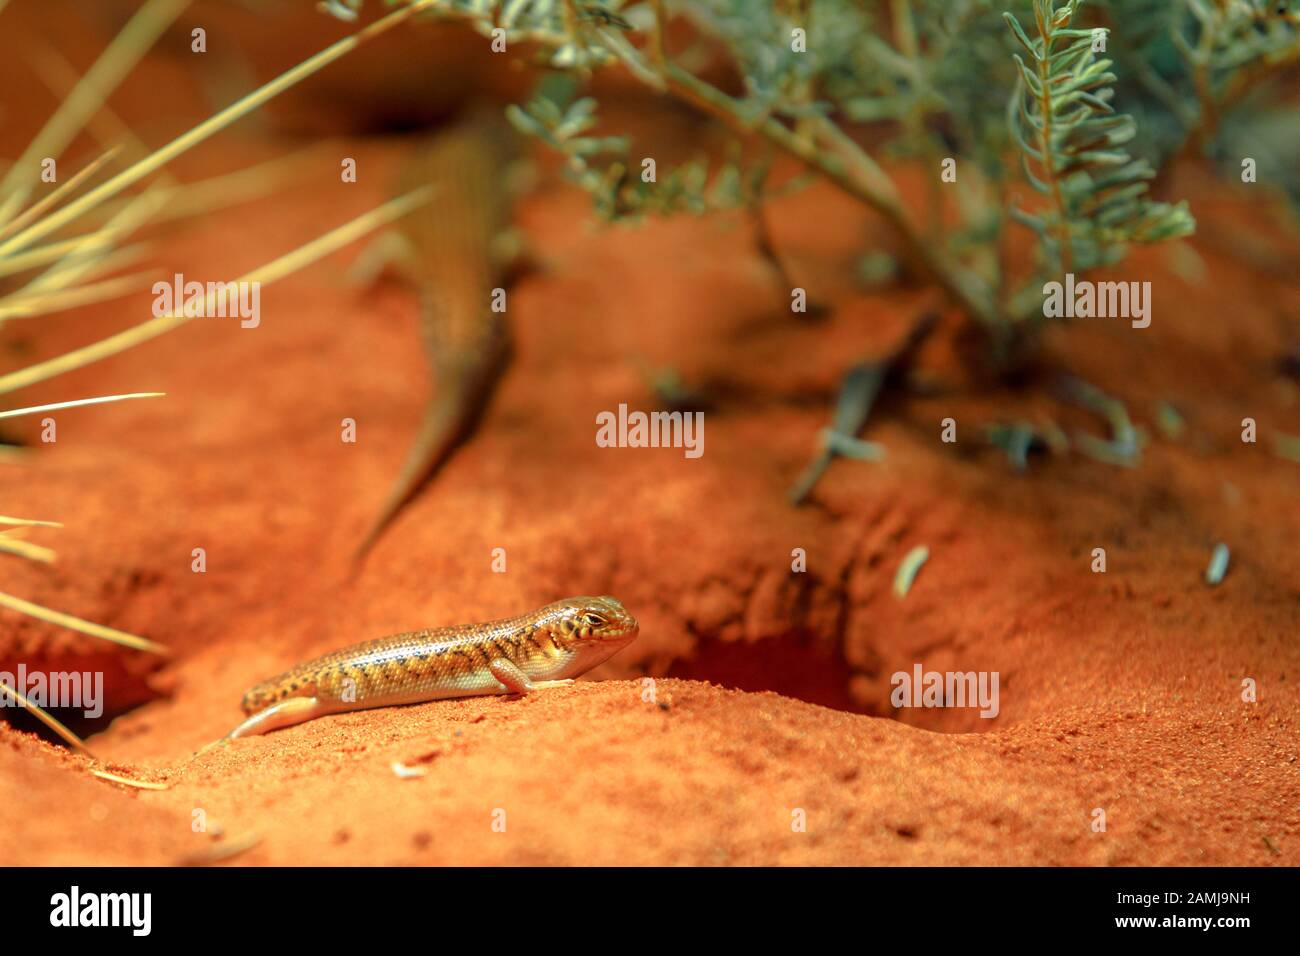 Panther or leopard skink, Ctenotus pantherinus, on red sand in Desert Park at Alice Springs, Northern Territory, Central Australia. Australian skinks Stock Photo